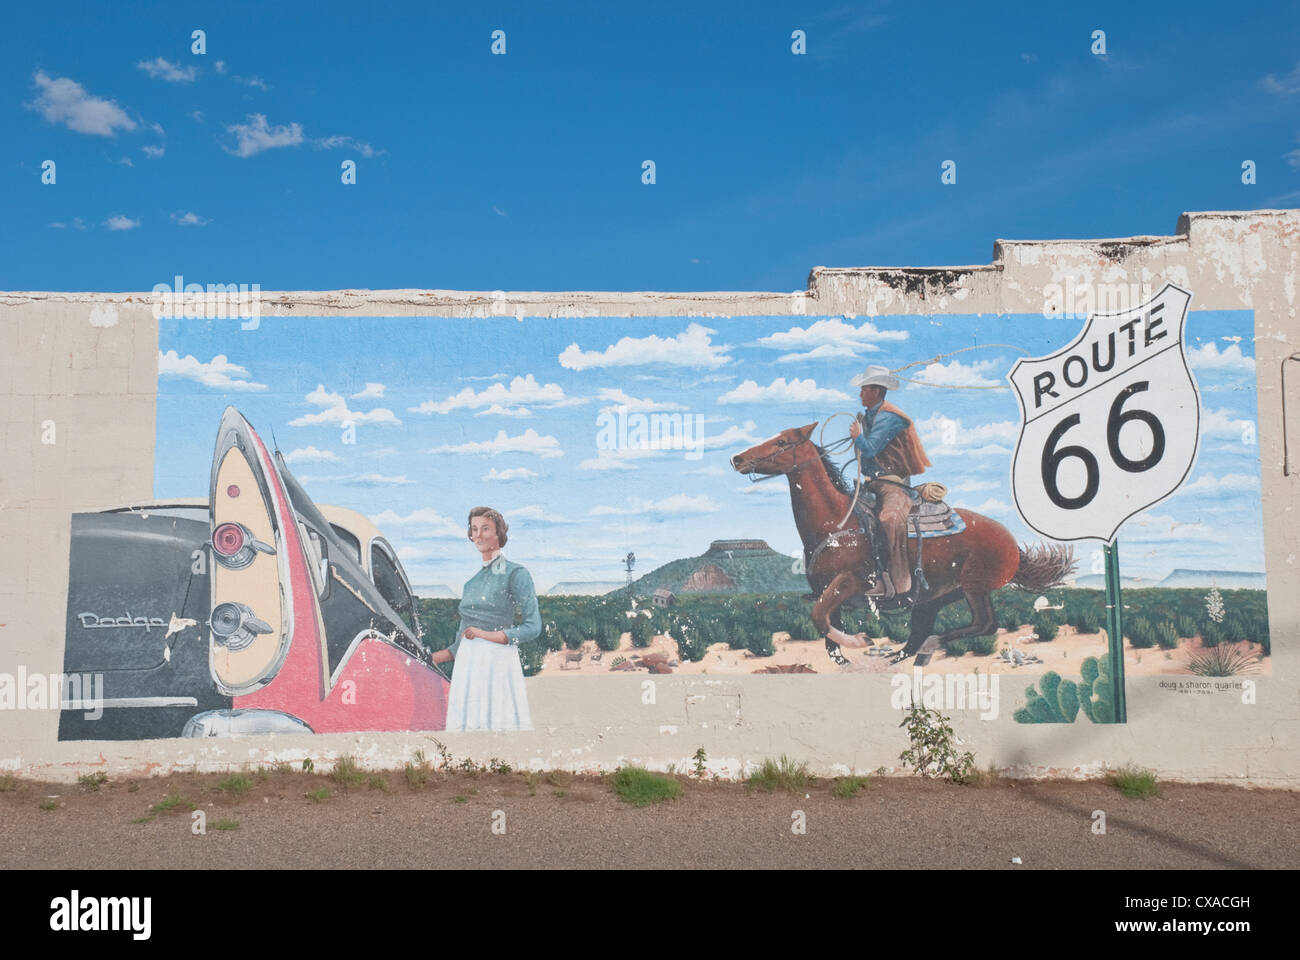 Large murals are on many buildings along Route 66 in Tucumcari, New Mexico. Stock Photo